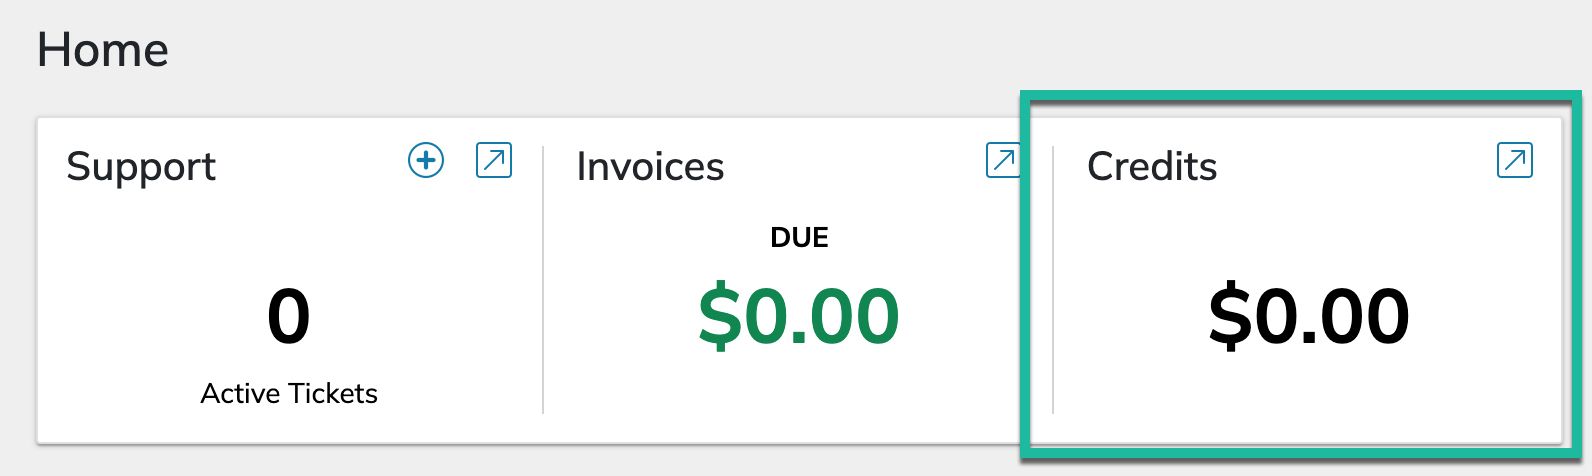 On the dashboard immediately after logging in, you can see at a glance your total account credit balance.